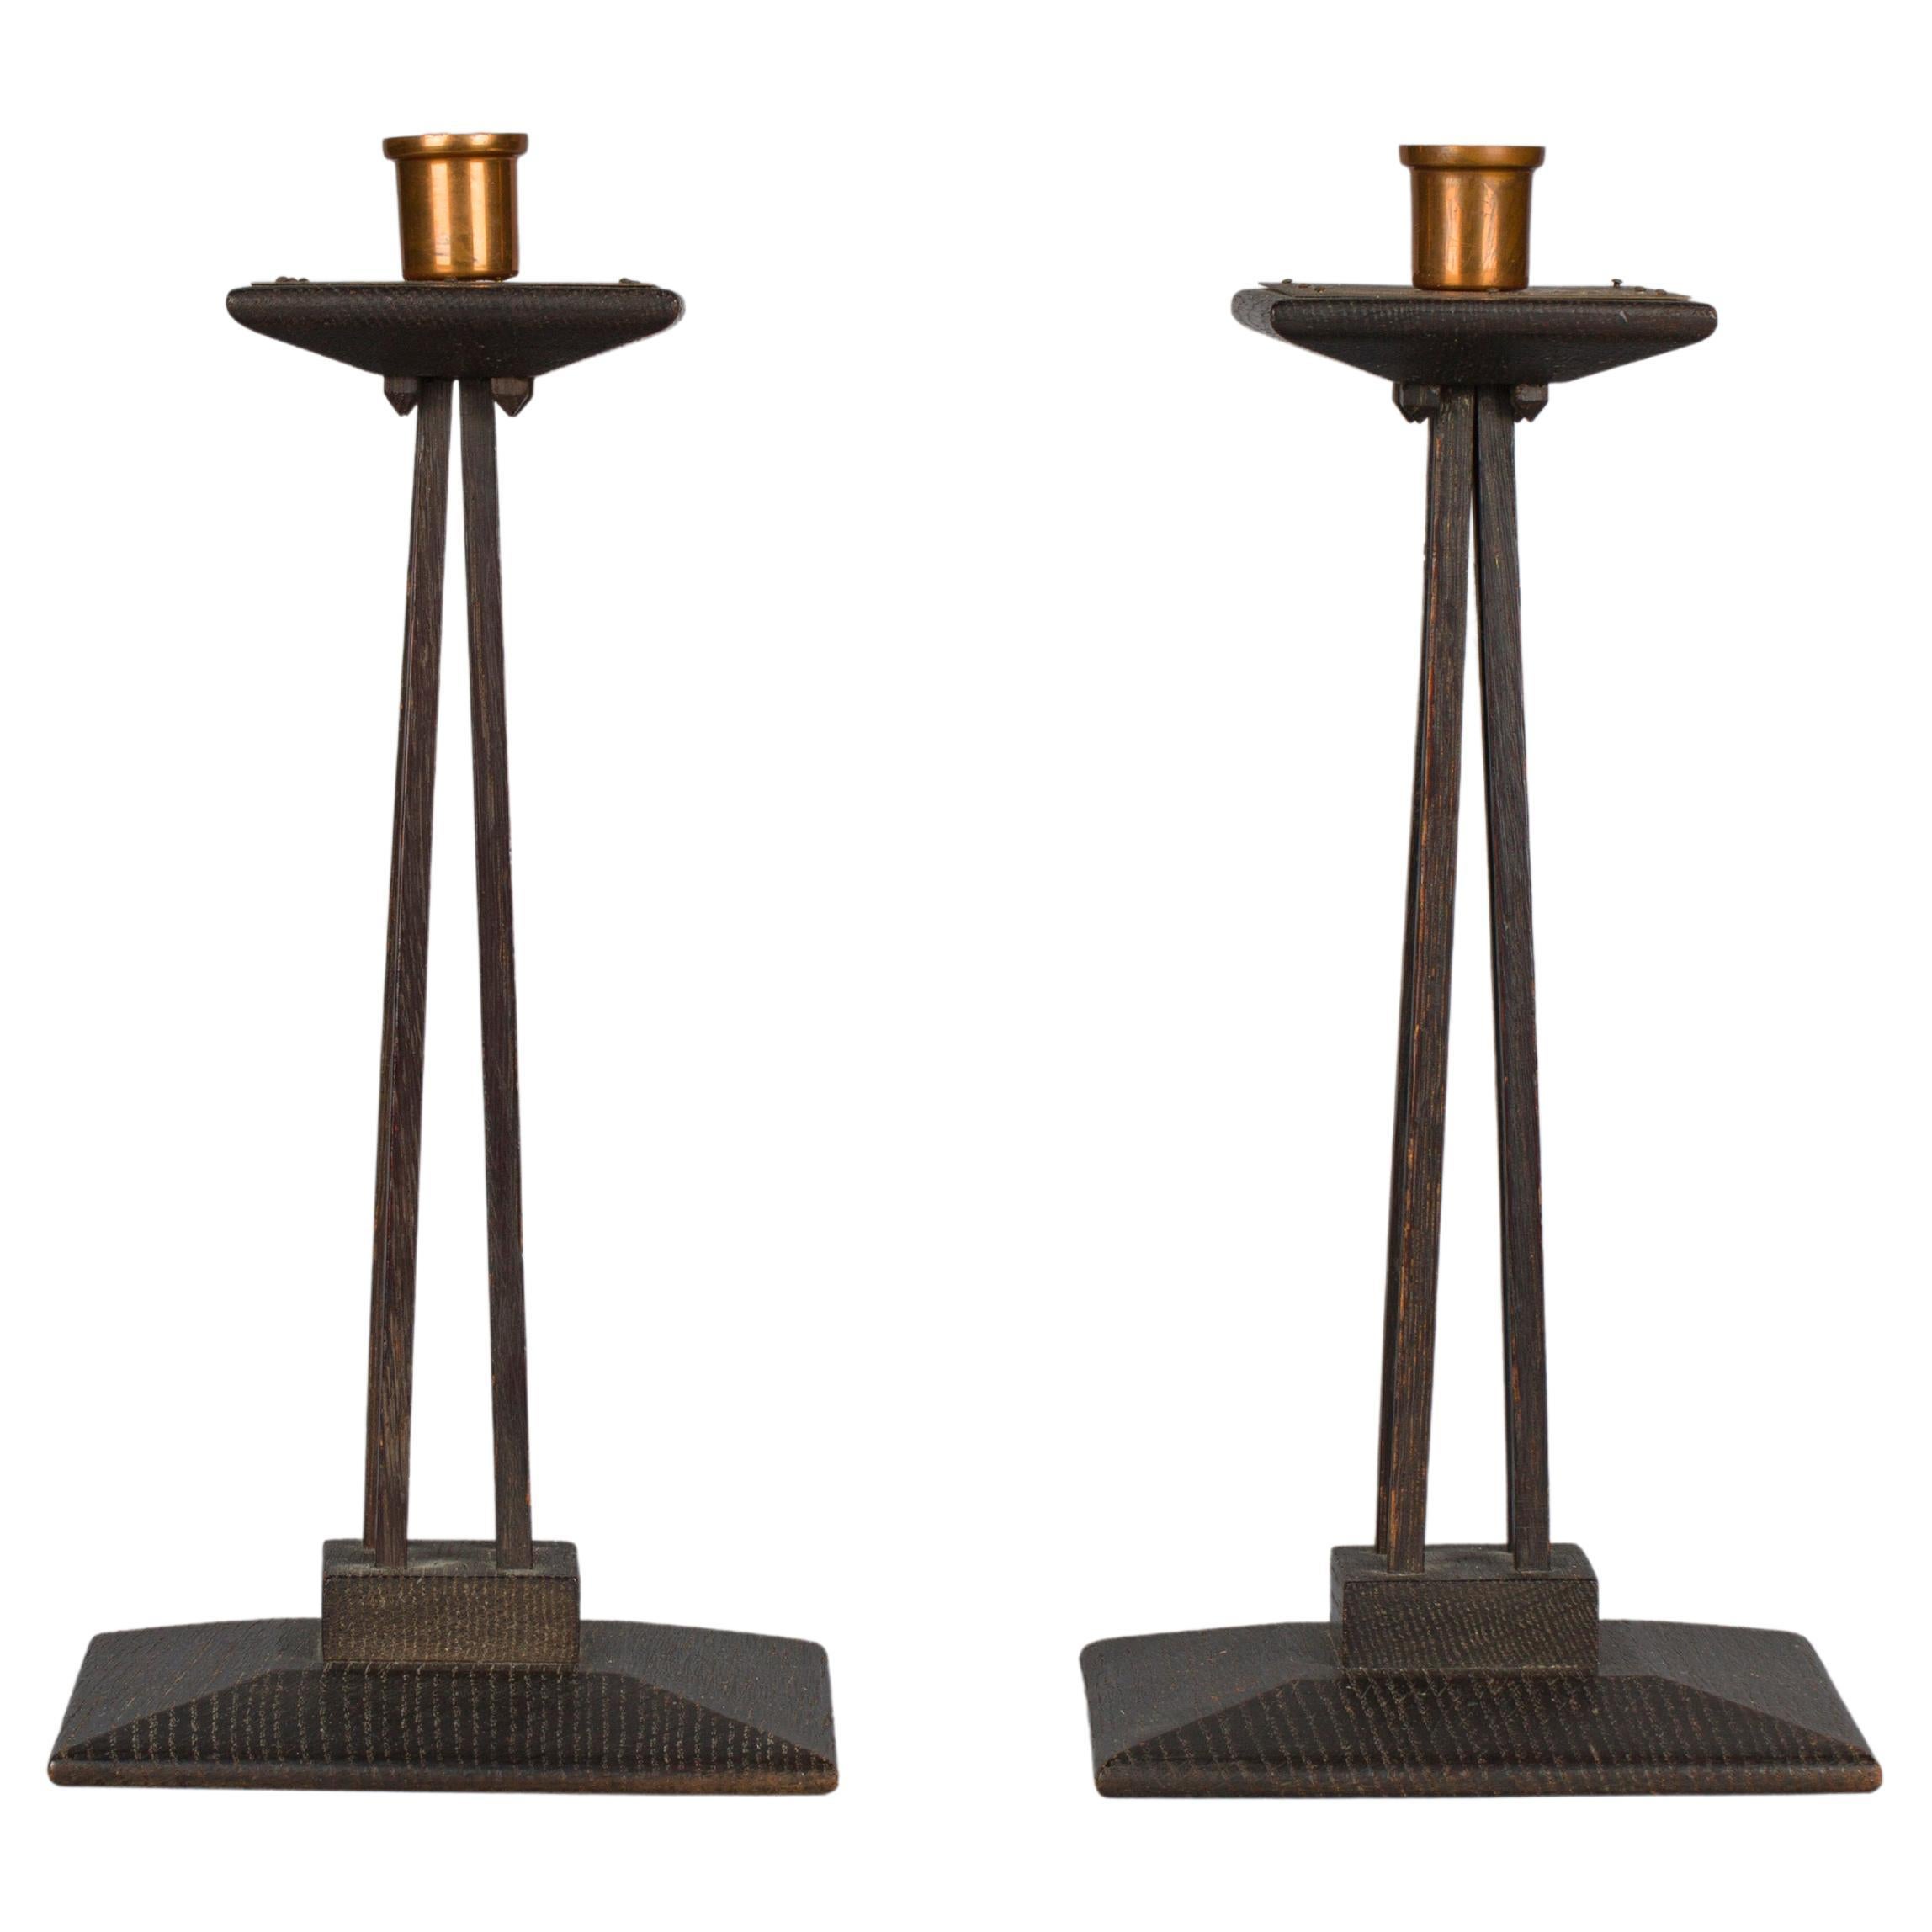 Pair of Oak Wood and Copper Candlesticks by Charles Rohlfs, 1904 For Sale